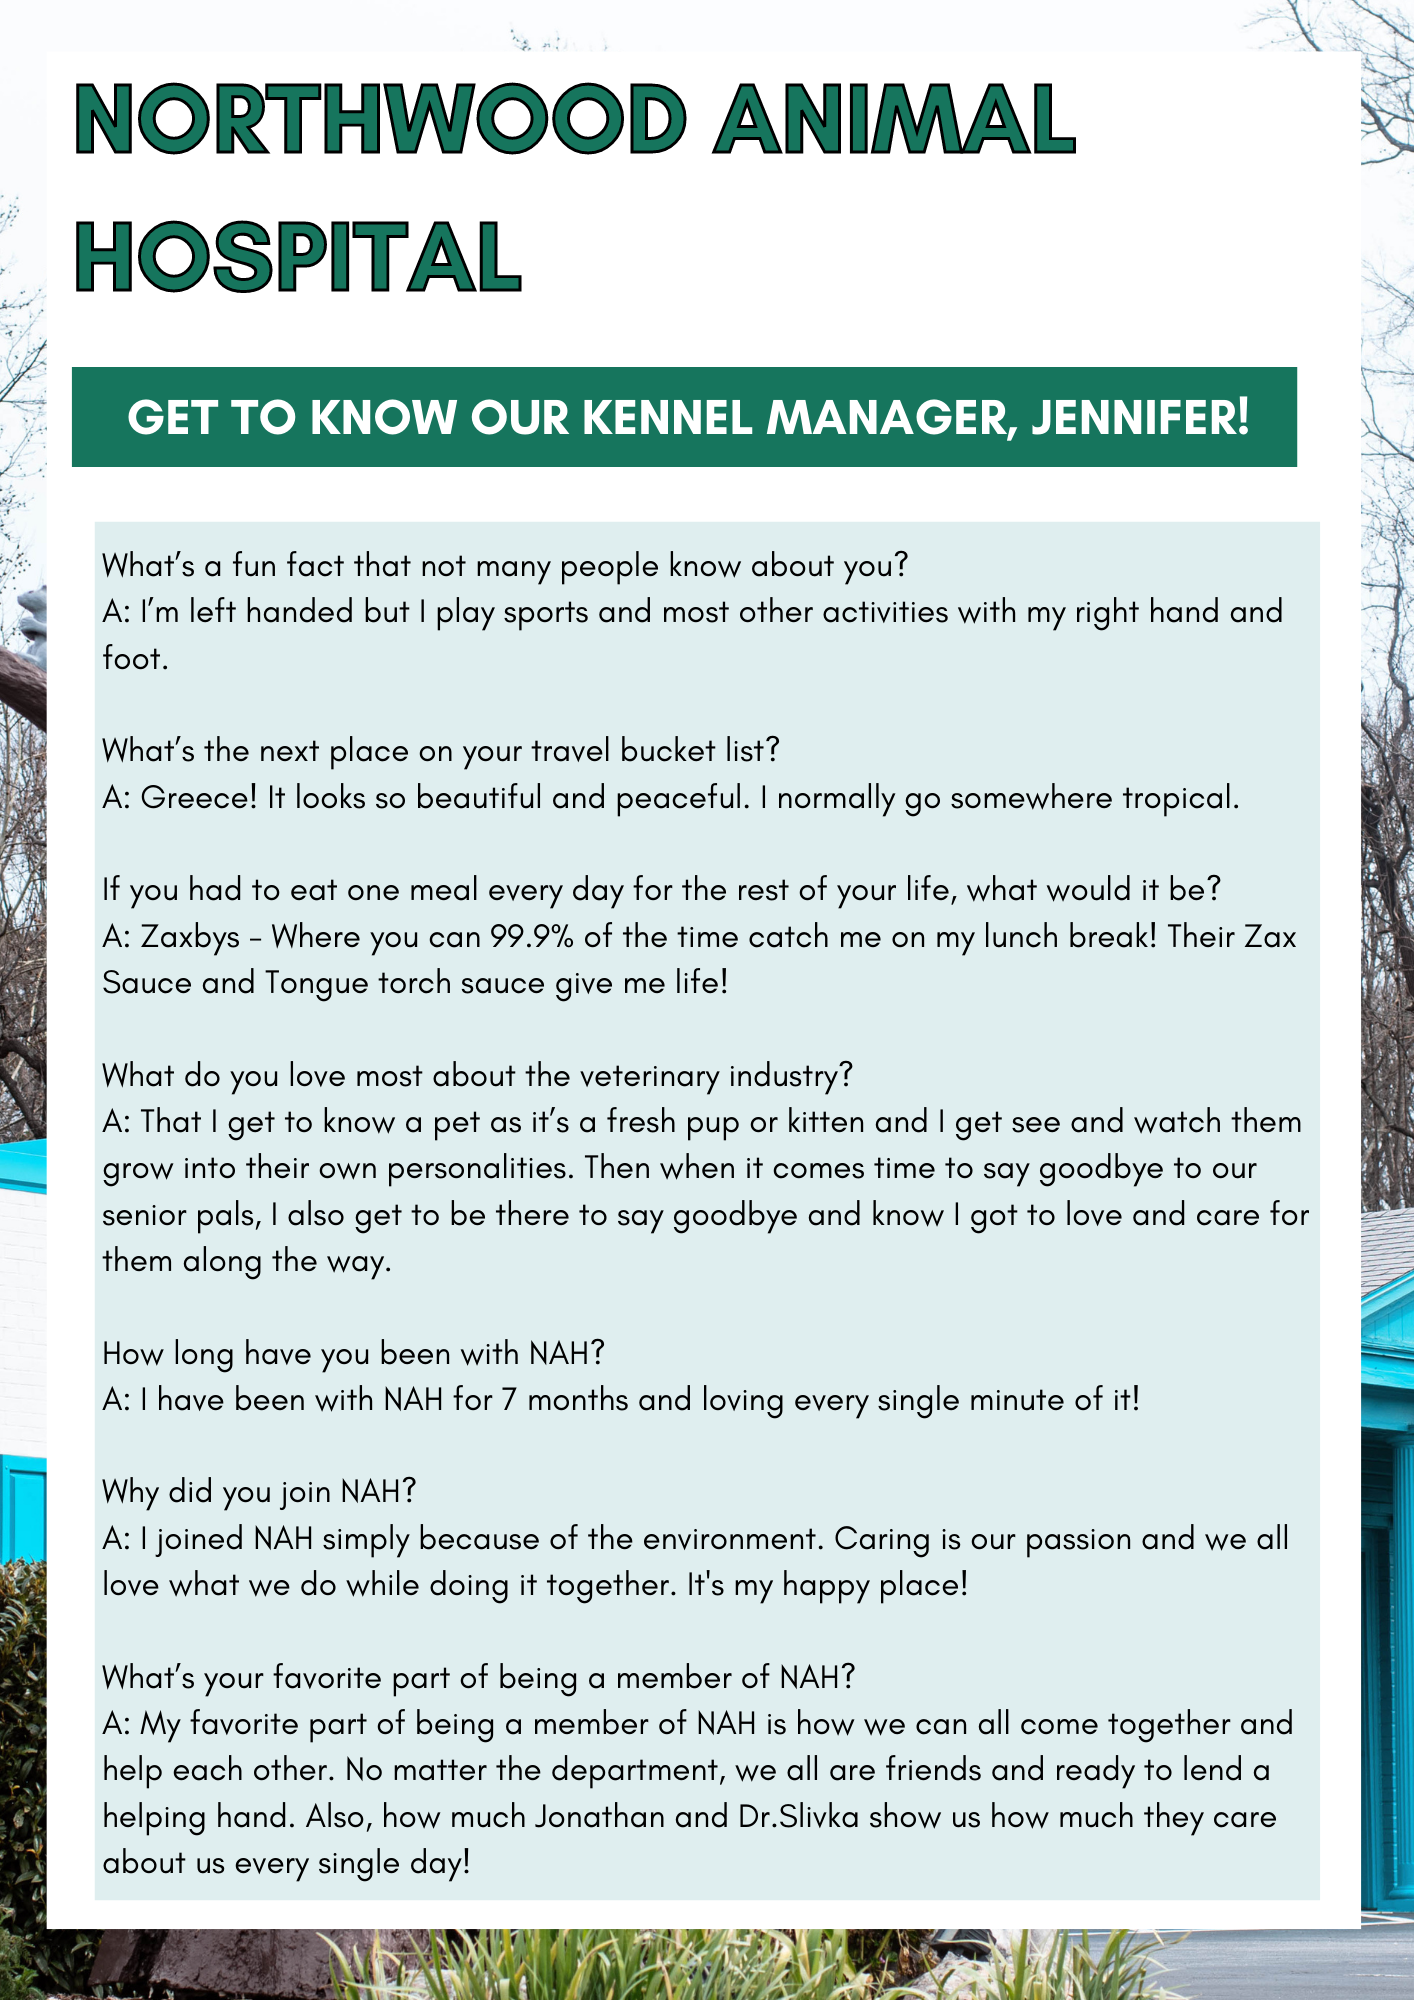 get to know manager jennifer